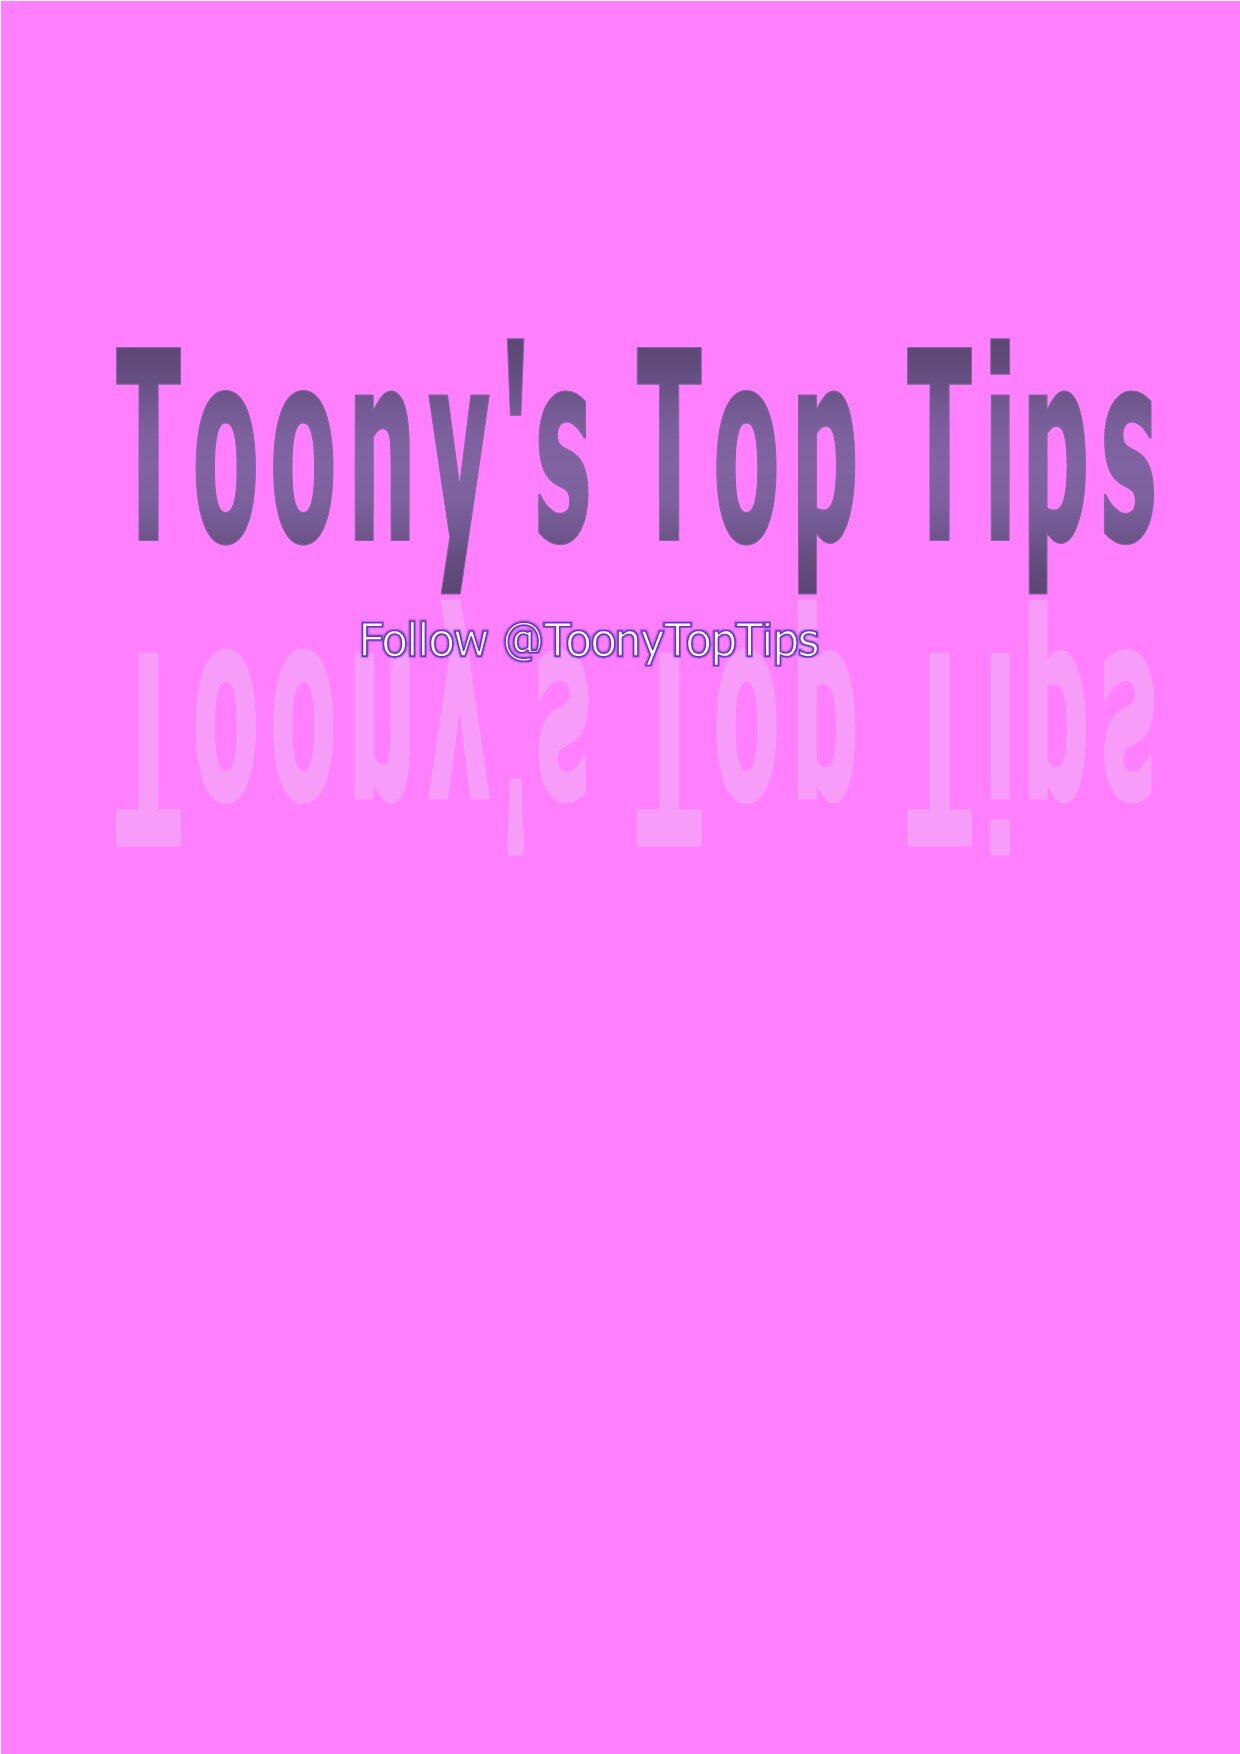 Toony's Top Tips. Submit yours to @ToonyTopTips Follow for little things that make your life easier